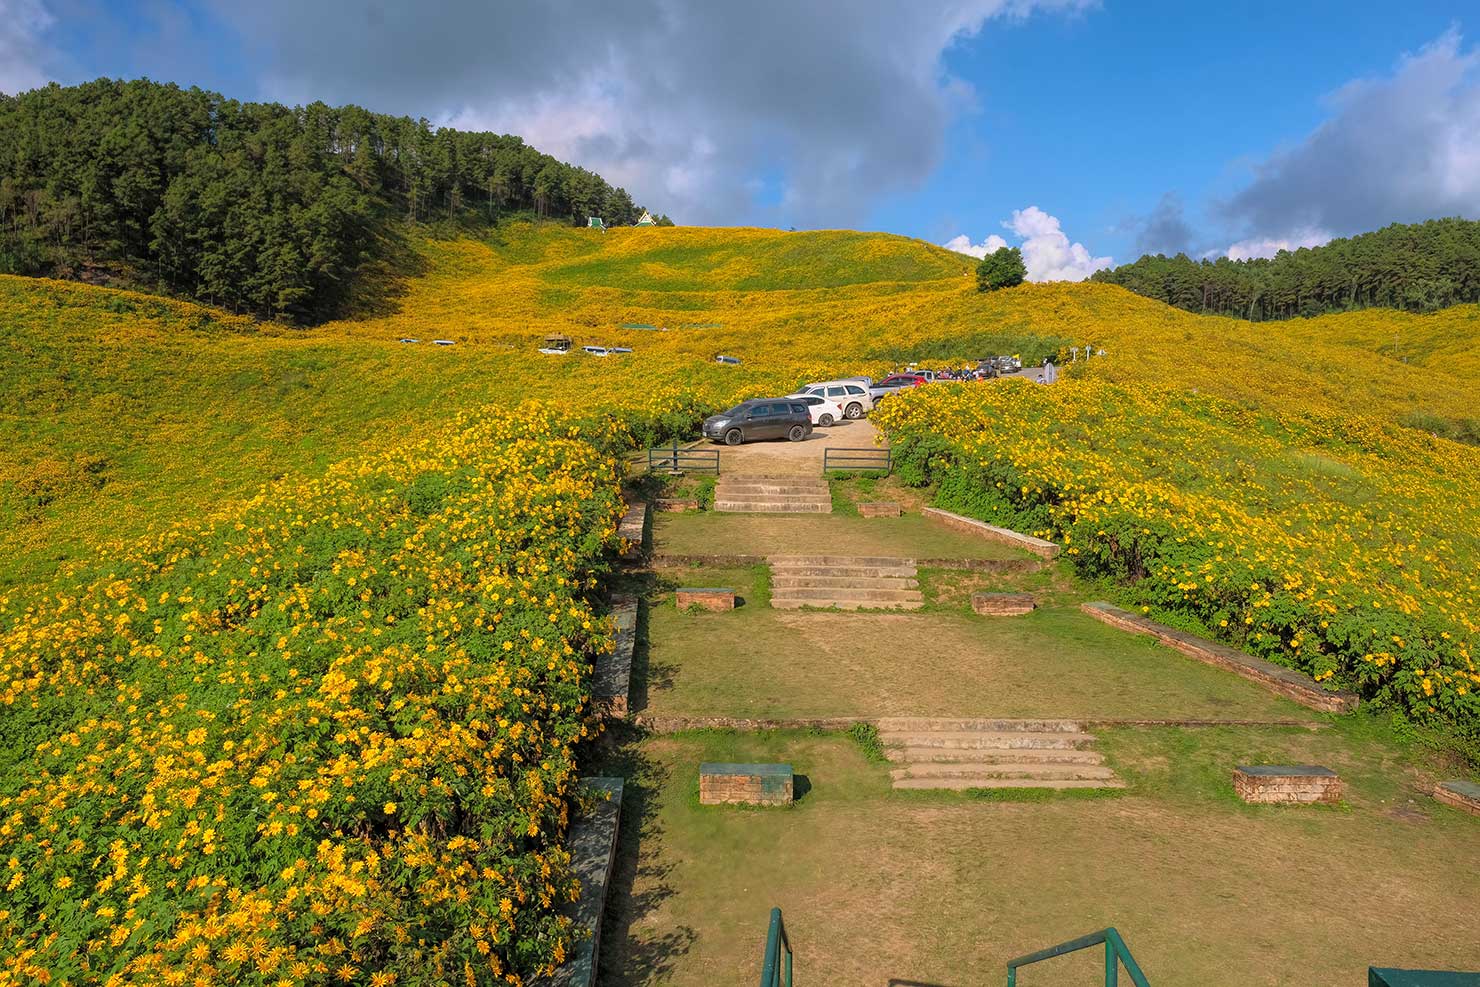 Mexican Sunflowers capet the hills during the Bua Thong Flower Festival in Khun Yuam, Thailand